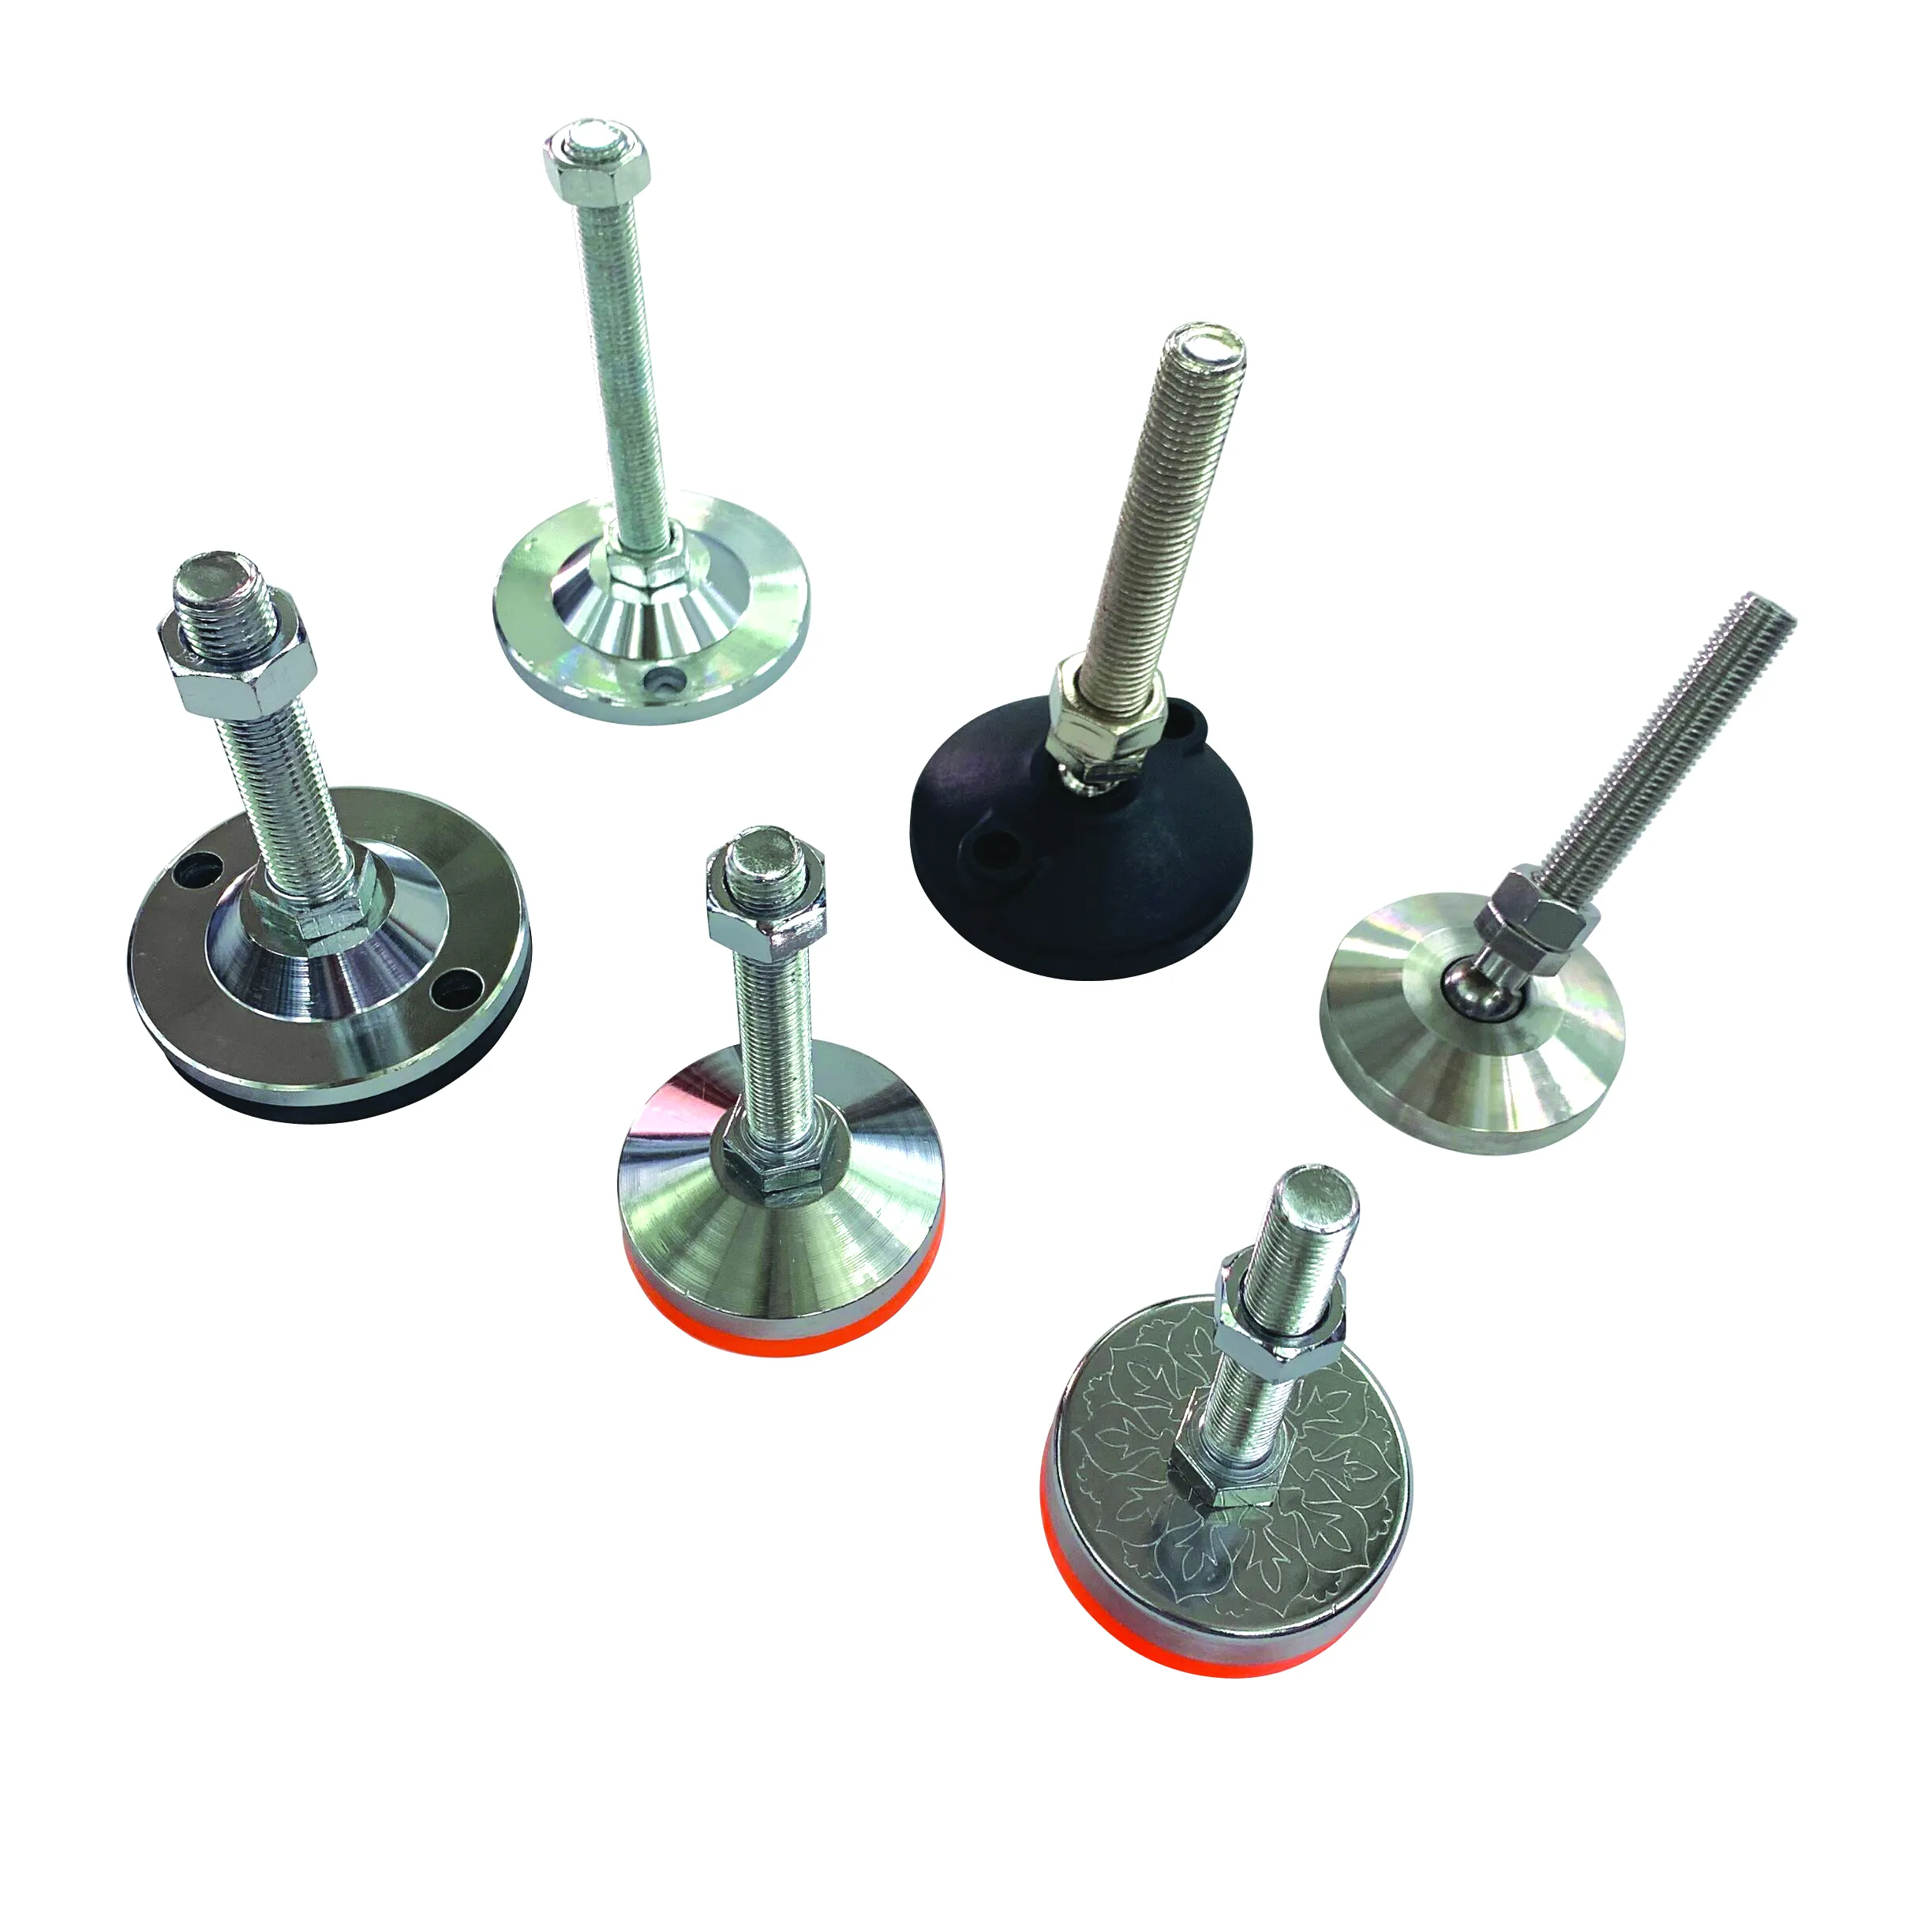 machine leveling feet m12 stud length 100mm heavy duty leveler legs with lock nuts, 4-pack